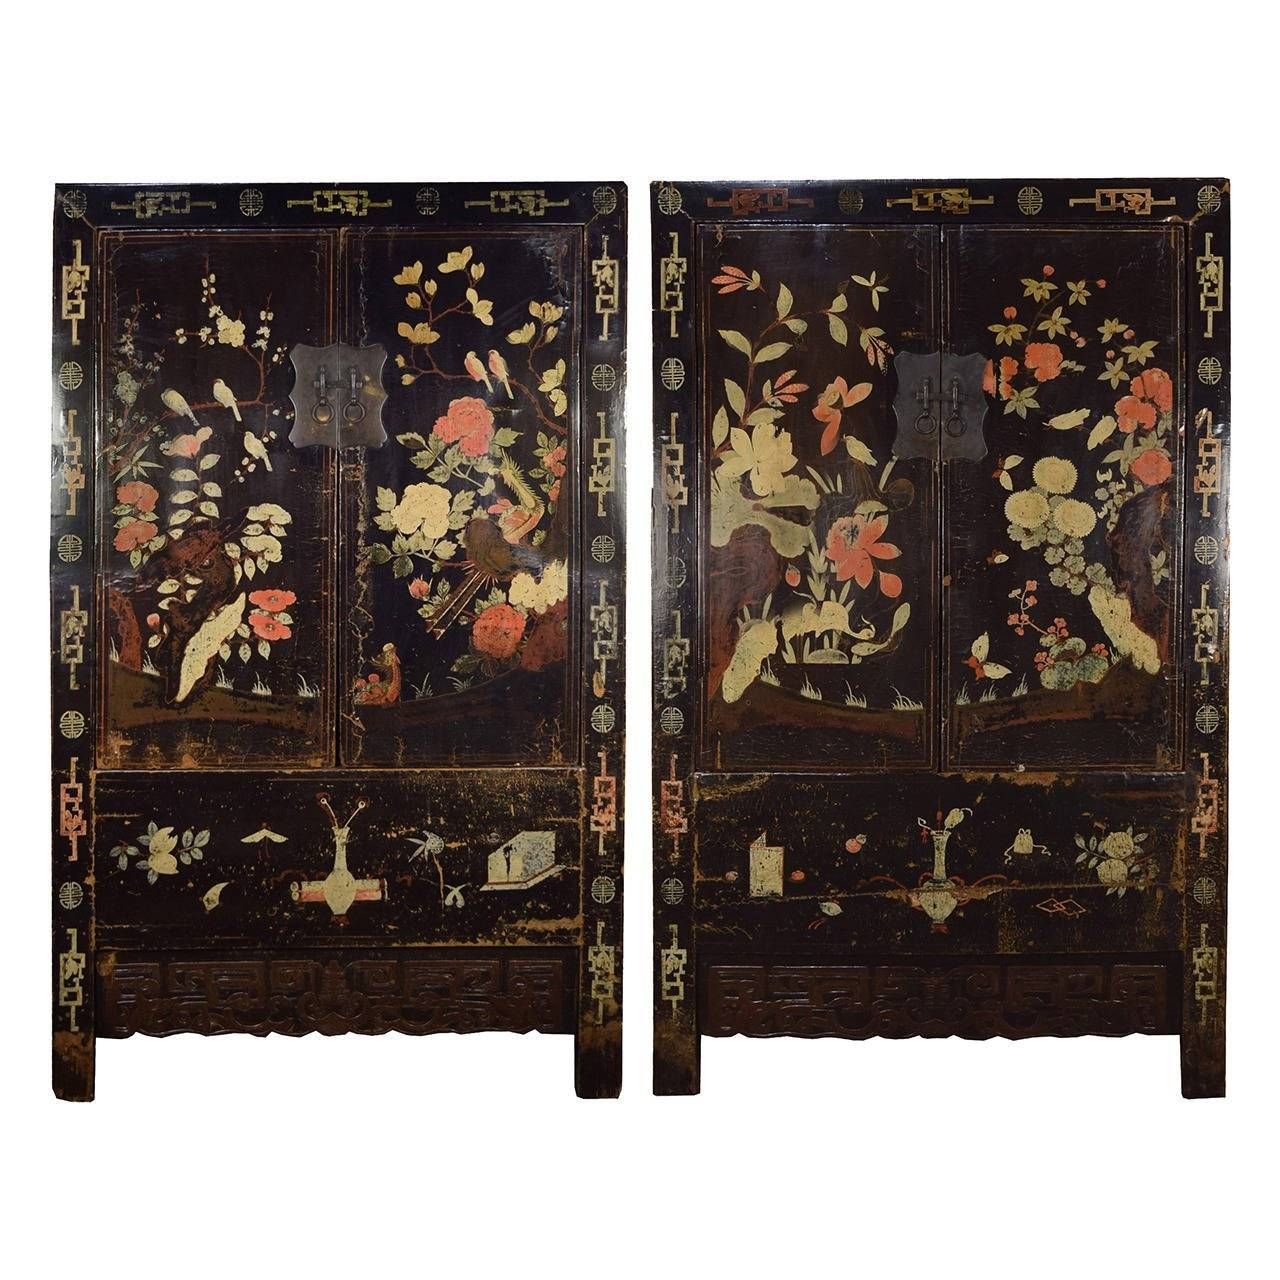 Chinese Wardrobes And Armoires – 75 For Sale At 1stdibs Intended For Chinese Wardrobes (View 2 of 15)